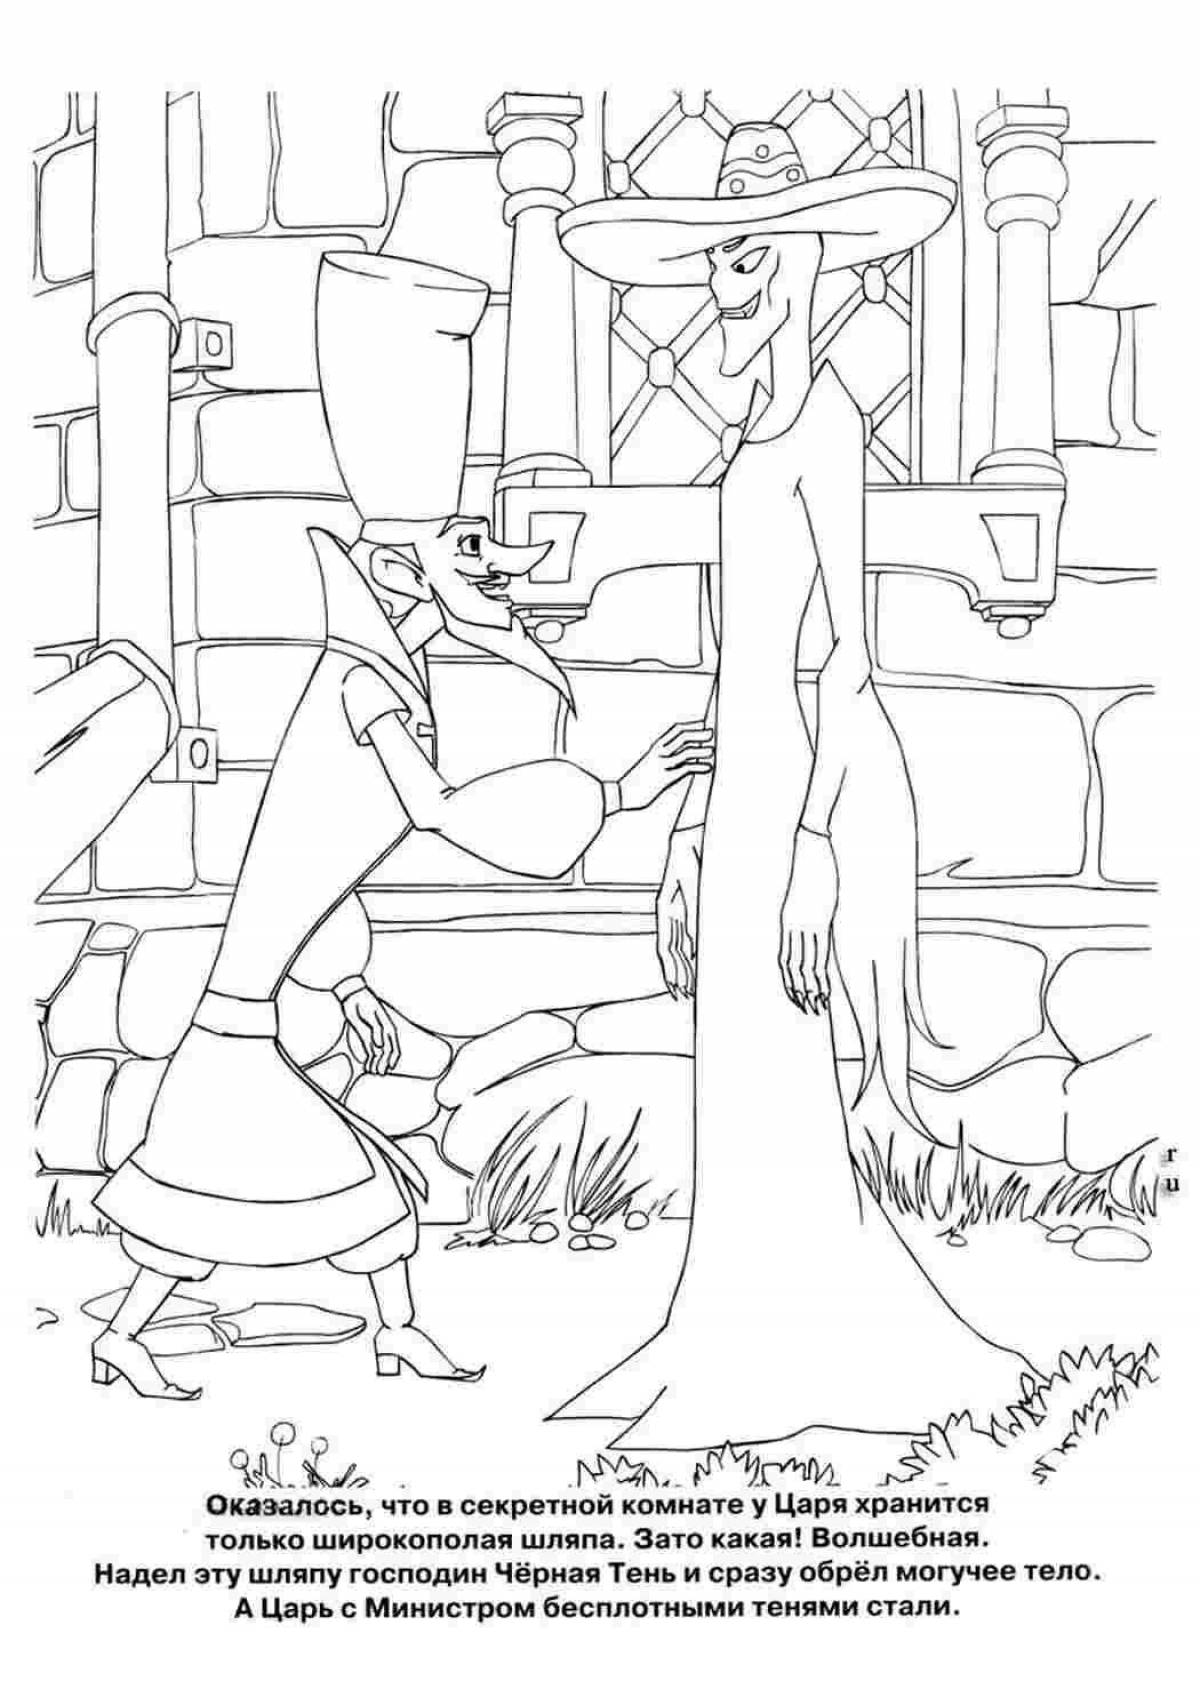 Radiant Ivan Tsarevich coloring page